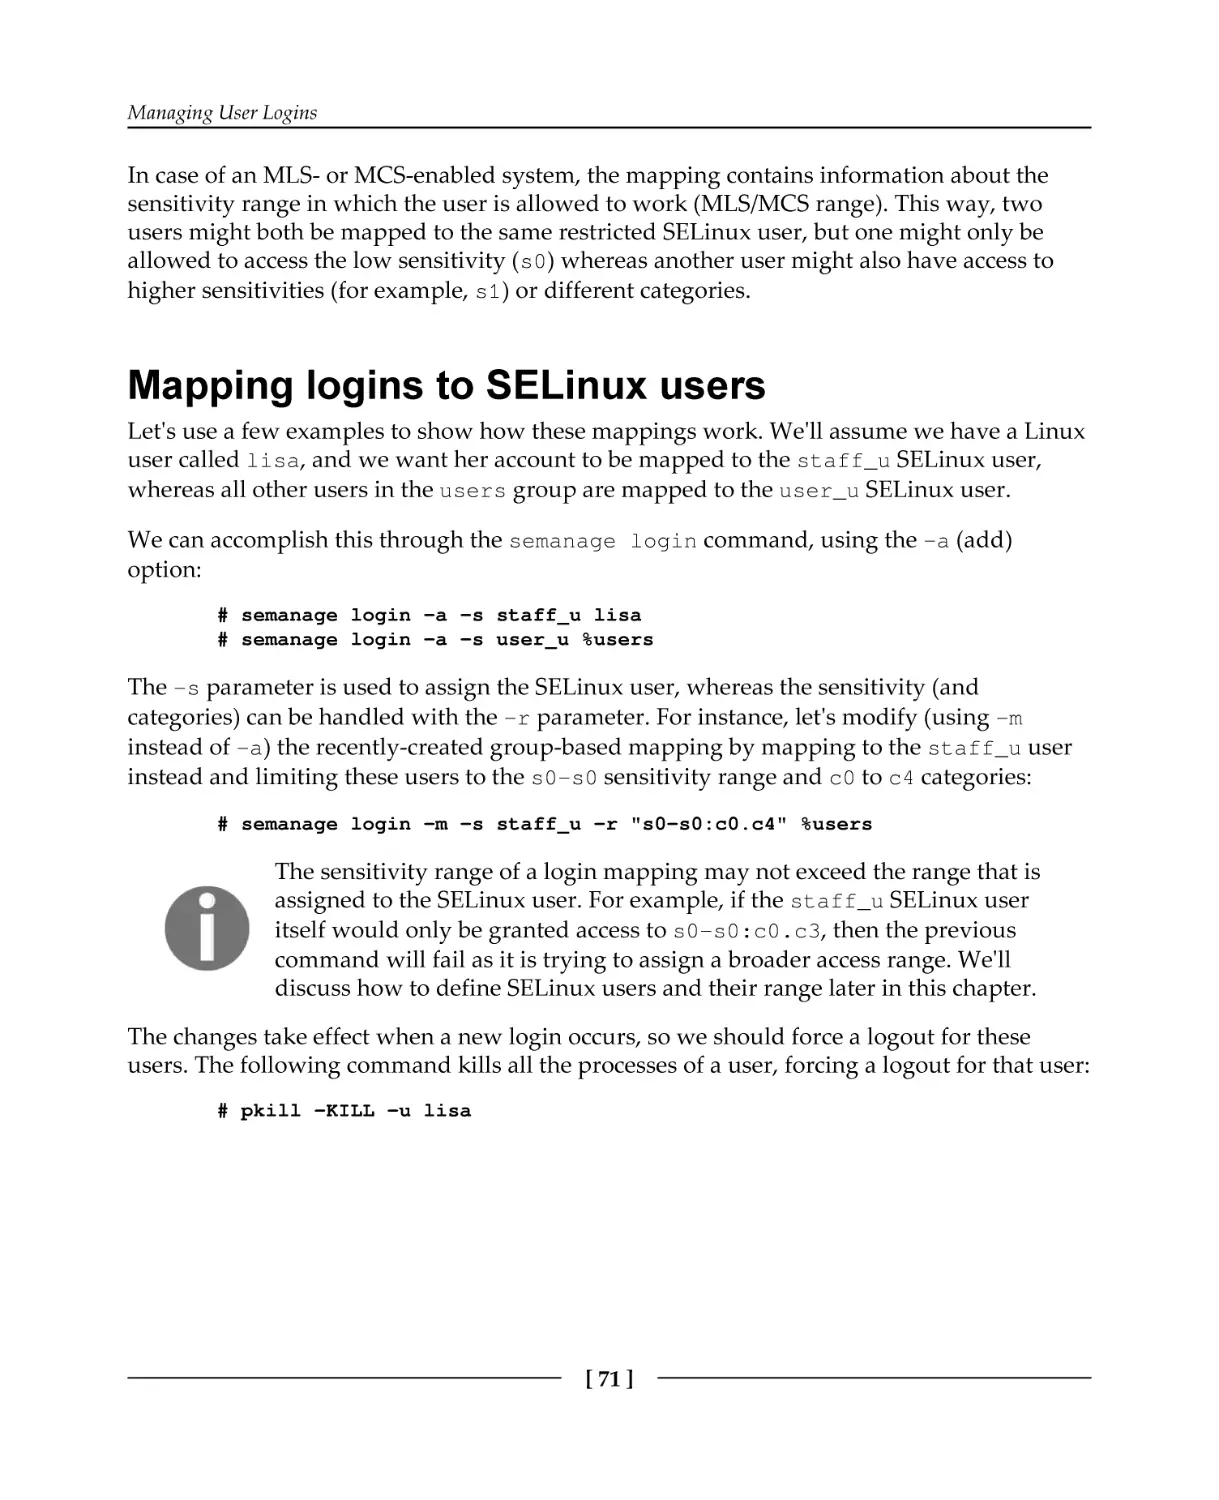 Mapping logins to SELinux users